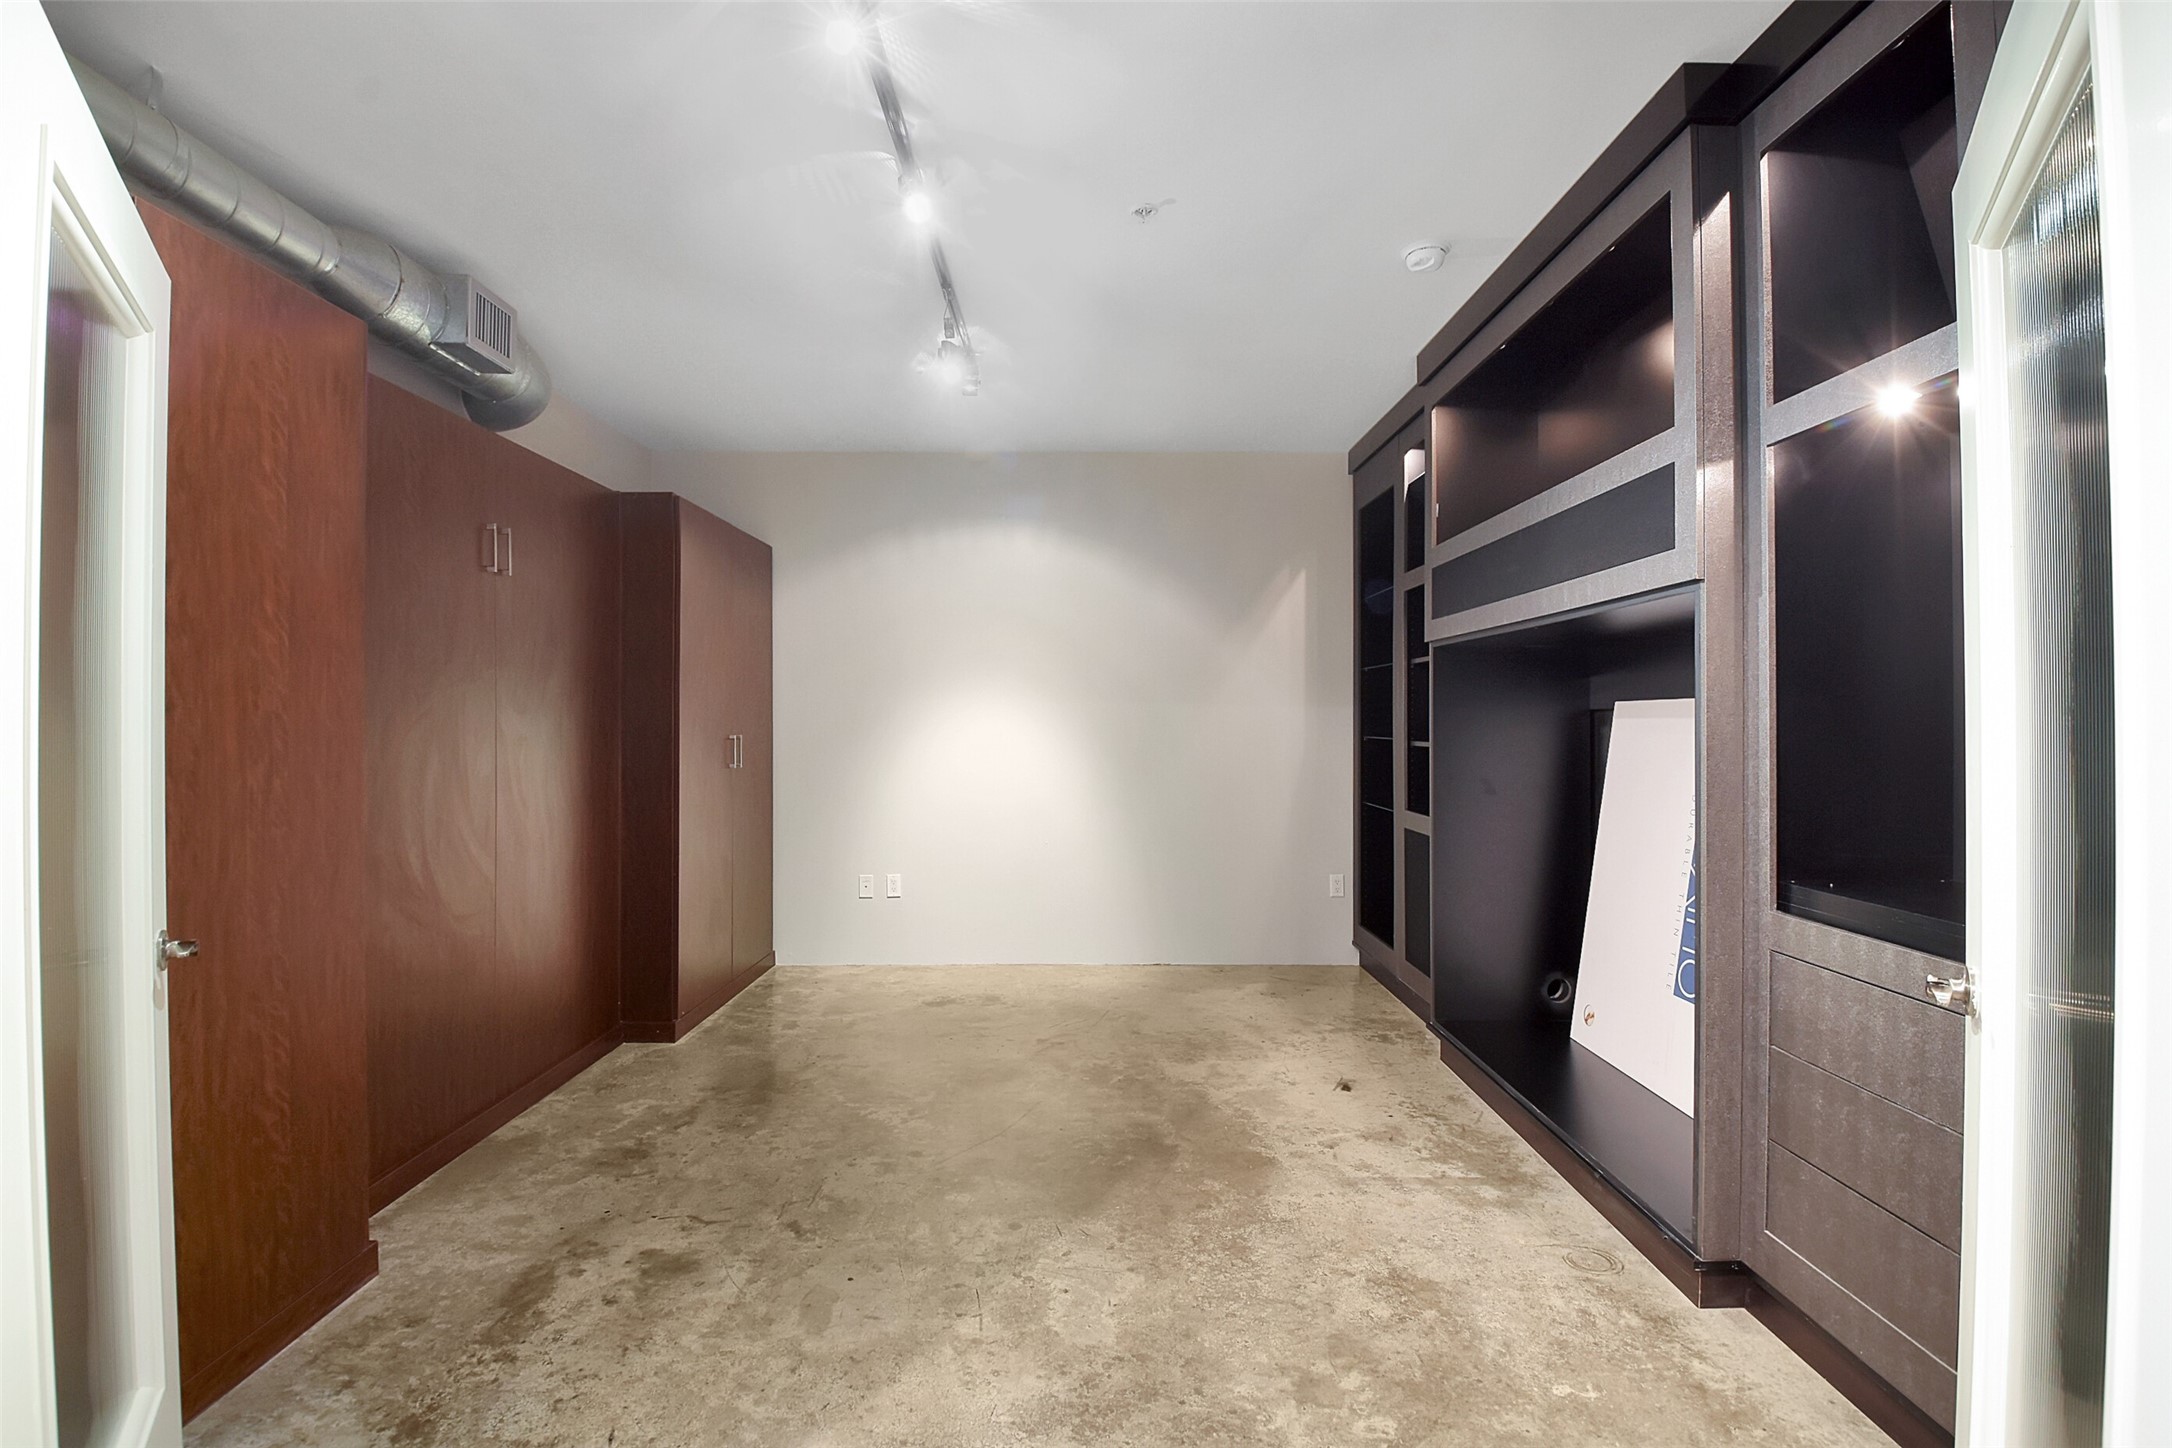 THIS SECONDARY BEDROOM IS LOCATED ON THE 1ST FLOOR AND INCLUDES A PULL DOWN MURPHY BED FLANKED BY CLOSETS.